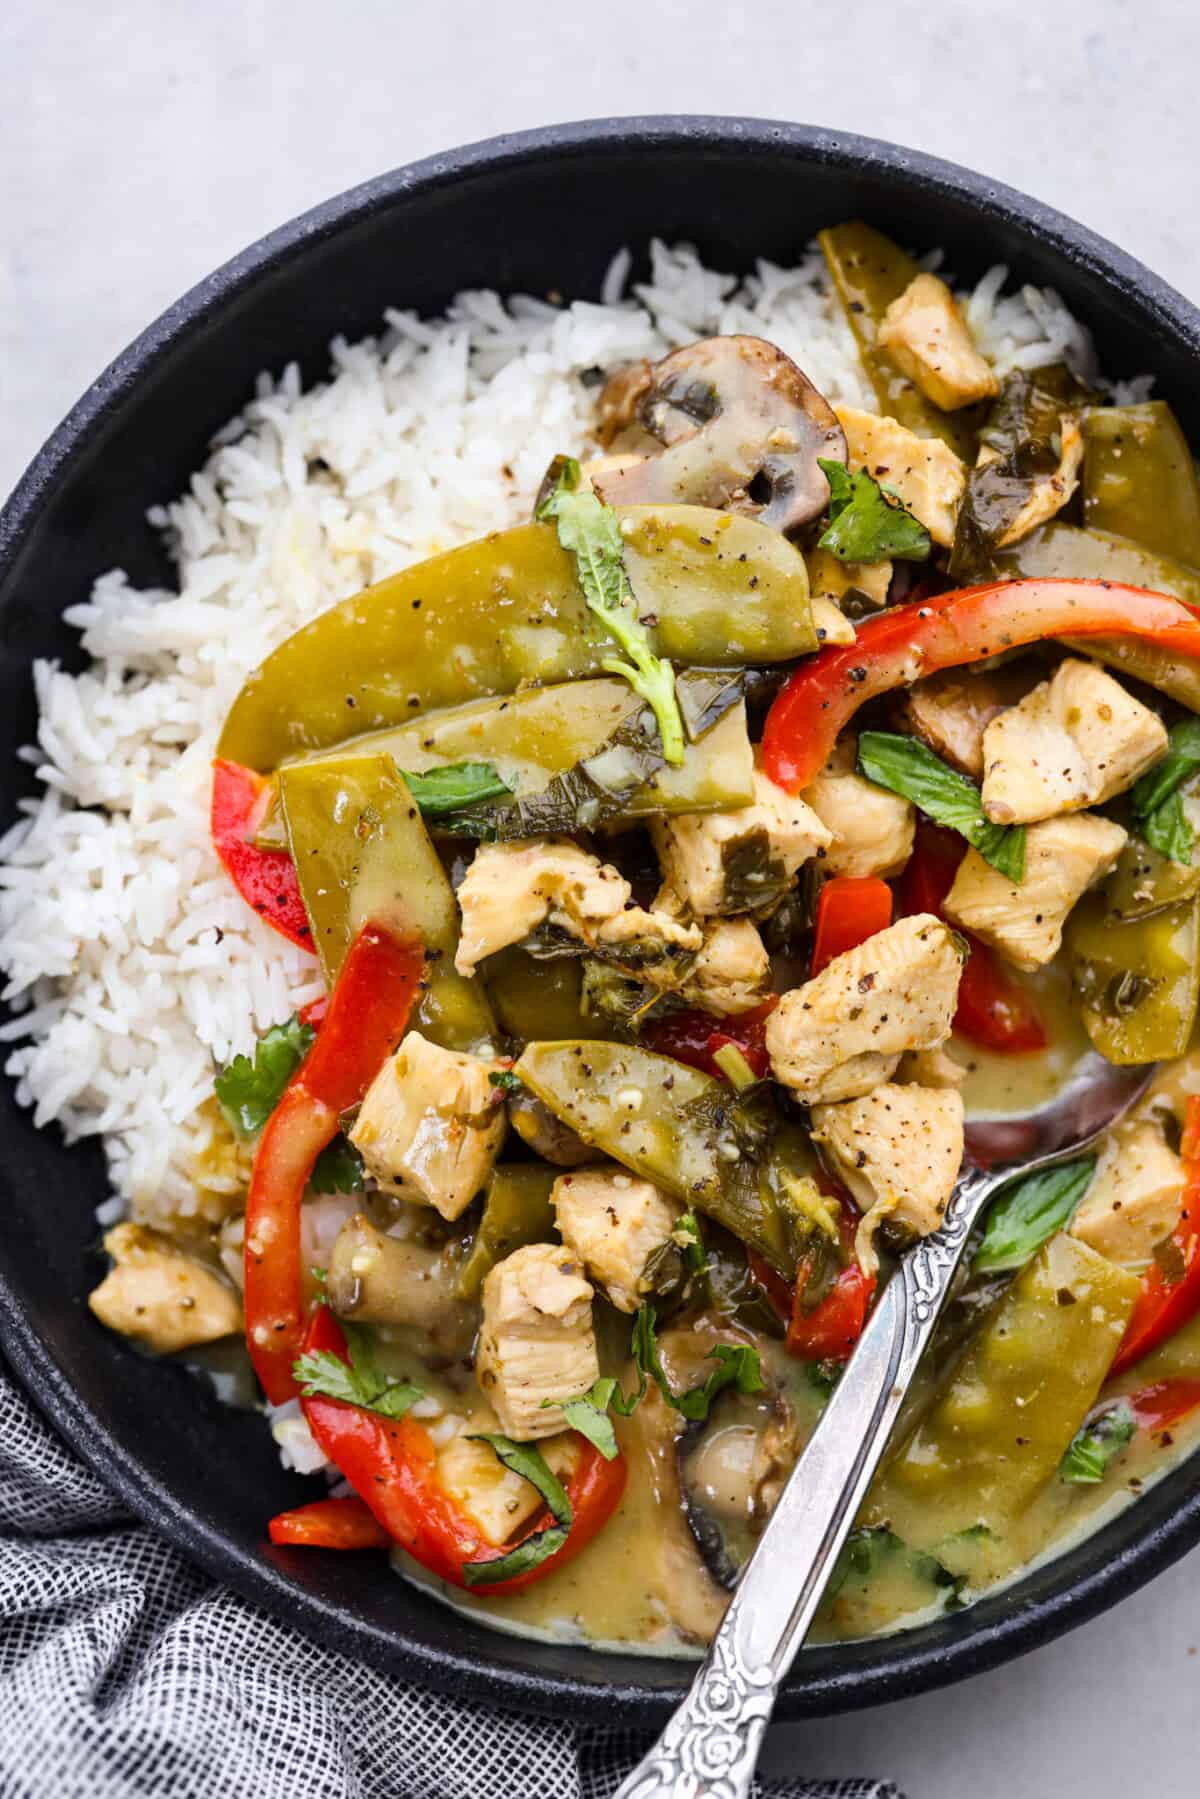 Green curry with chicken served over white rice.